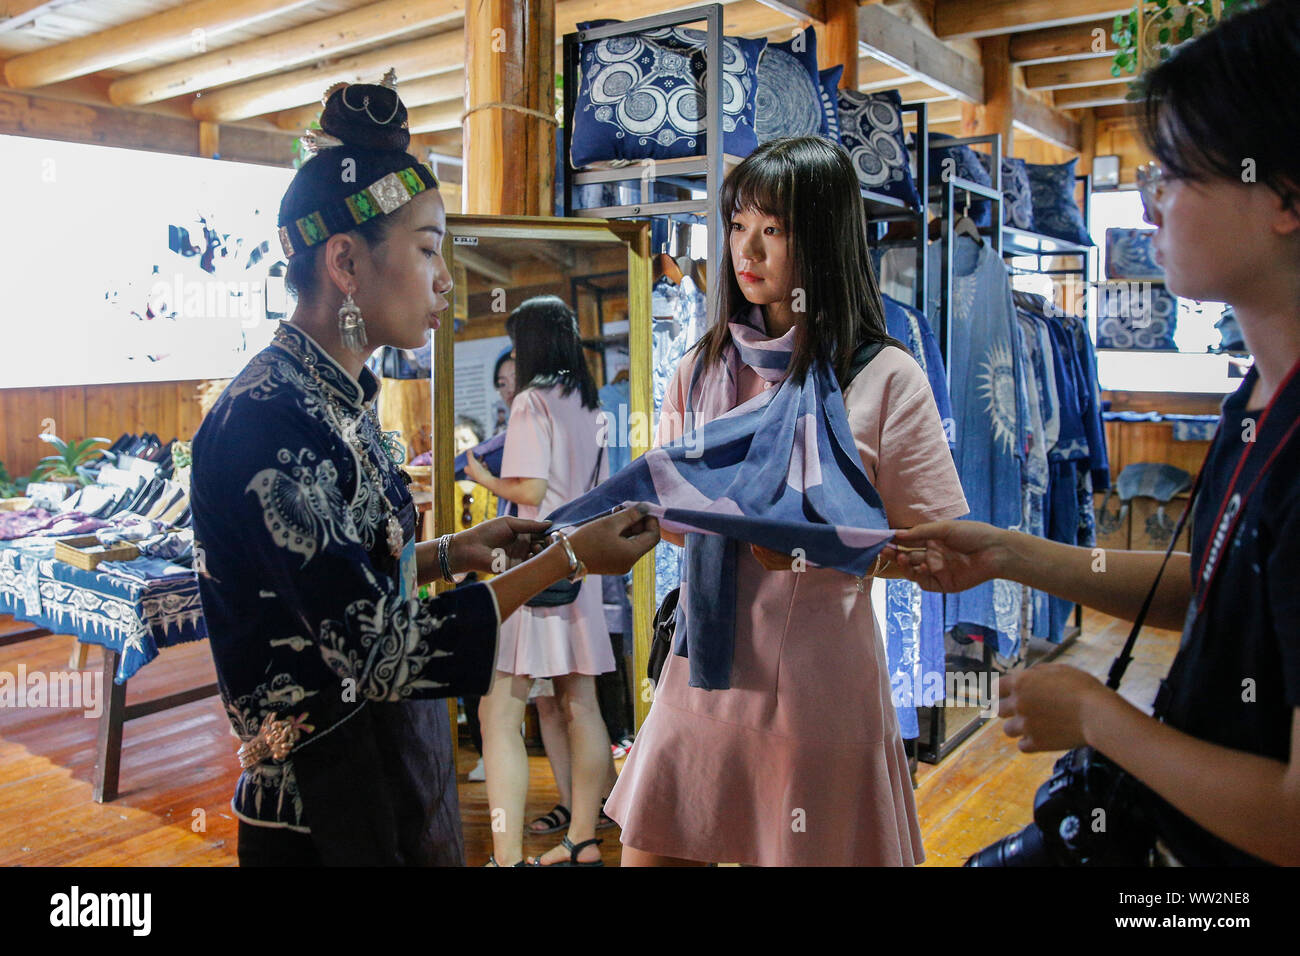 (190912) -- BEIJING, Sept. 12, 2019 (Xinhua) -- Zhang Yiping (1st L) from "Mom Handworks Cooperative" introduces a batik scarf to a tourist at a batik craft cooperative of "Mom Handworks" in Danzhai County, southwest China's Guizhou Province, Aug. 23, 2019. "Mom Handworks" is a public welfare project initiated by China Women's Development Foundation (CWDF) in September 2016. About 46 "Mom Handworks Cooperatives" have been established in 13 provinces nationwide. The project helps create jobs for poverty-stricken mothers and provide them with some handcraft skills to make handicrafts with local Stock Photo